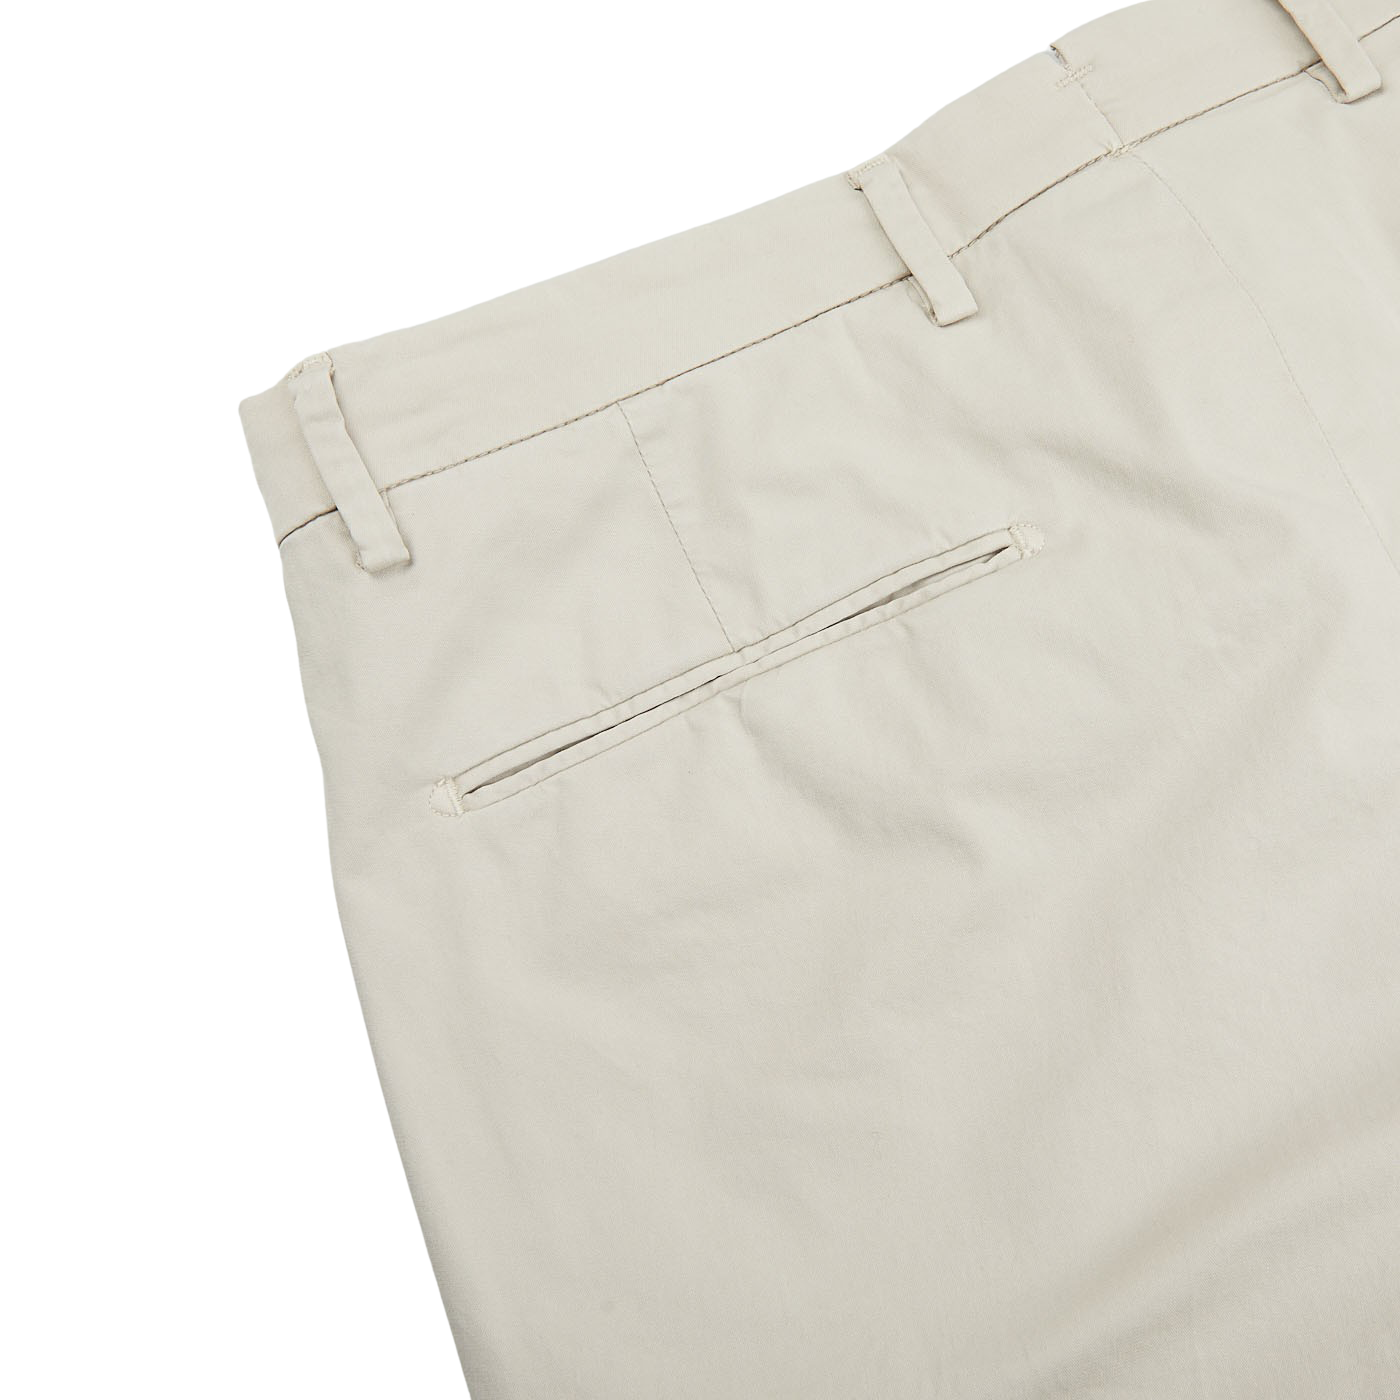 A close up of Light Beige Cotton Stretch BG07 Pleated Chinos by Briglia with a touch of stretch.